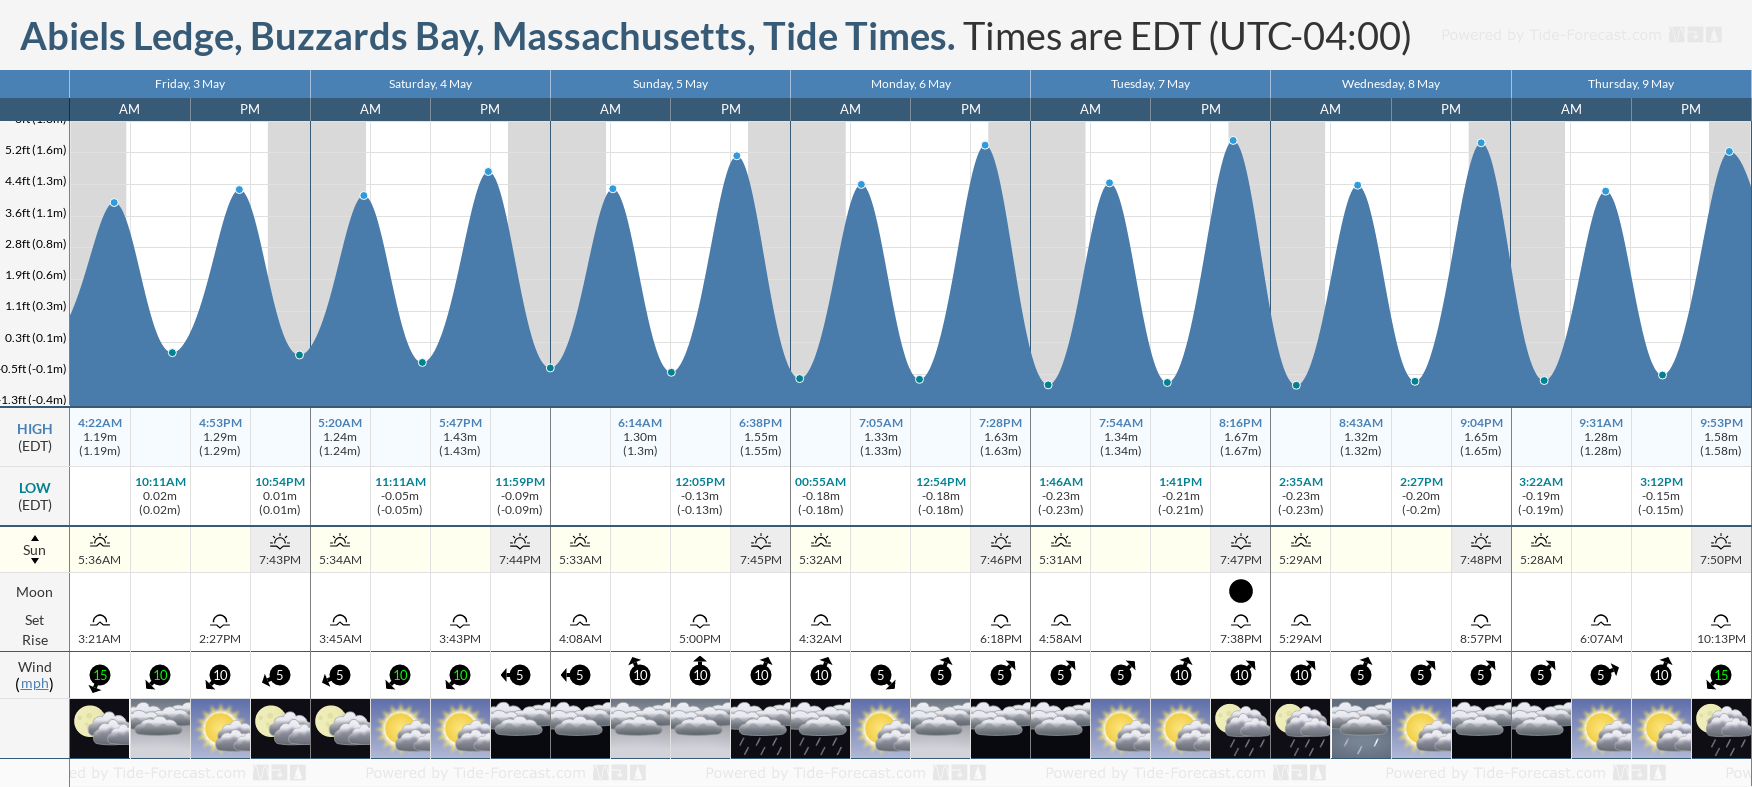 Abiels Ledge, Buzzards Bay, Massachusetts Tide Chart including high and low tide tide times for the next 7 days